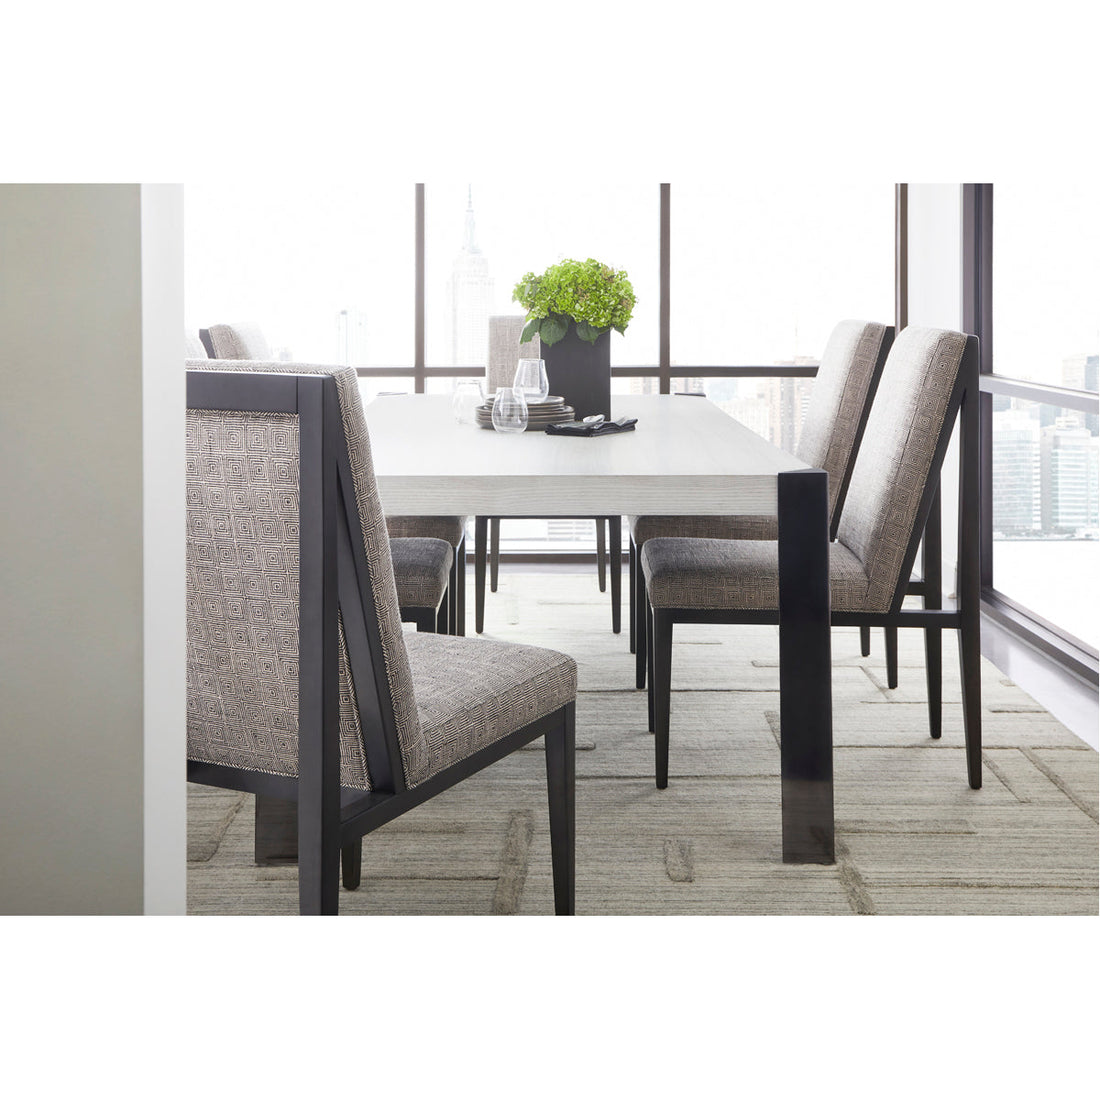 Vanguard Furniture Angled Dining Table with Metal Captured Leg